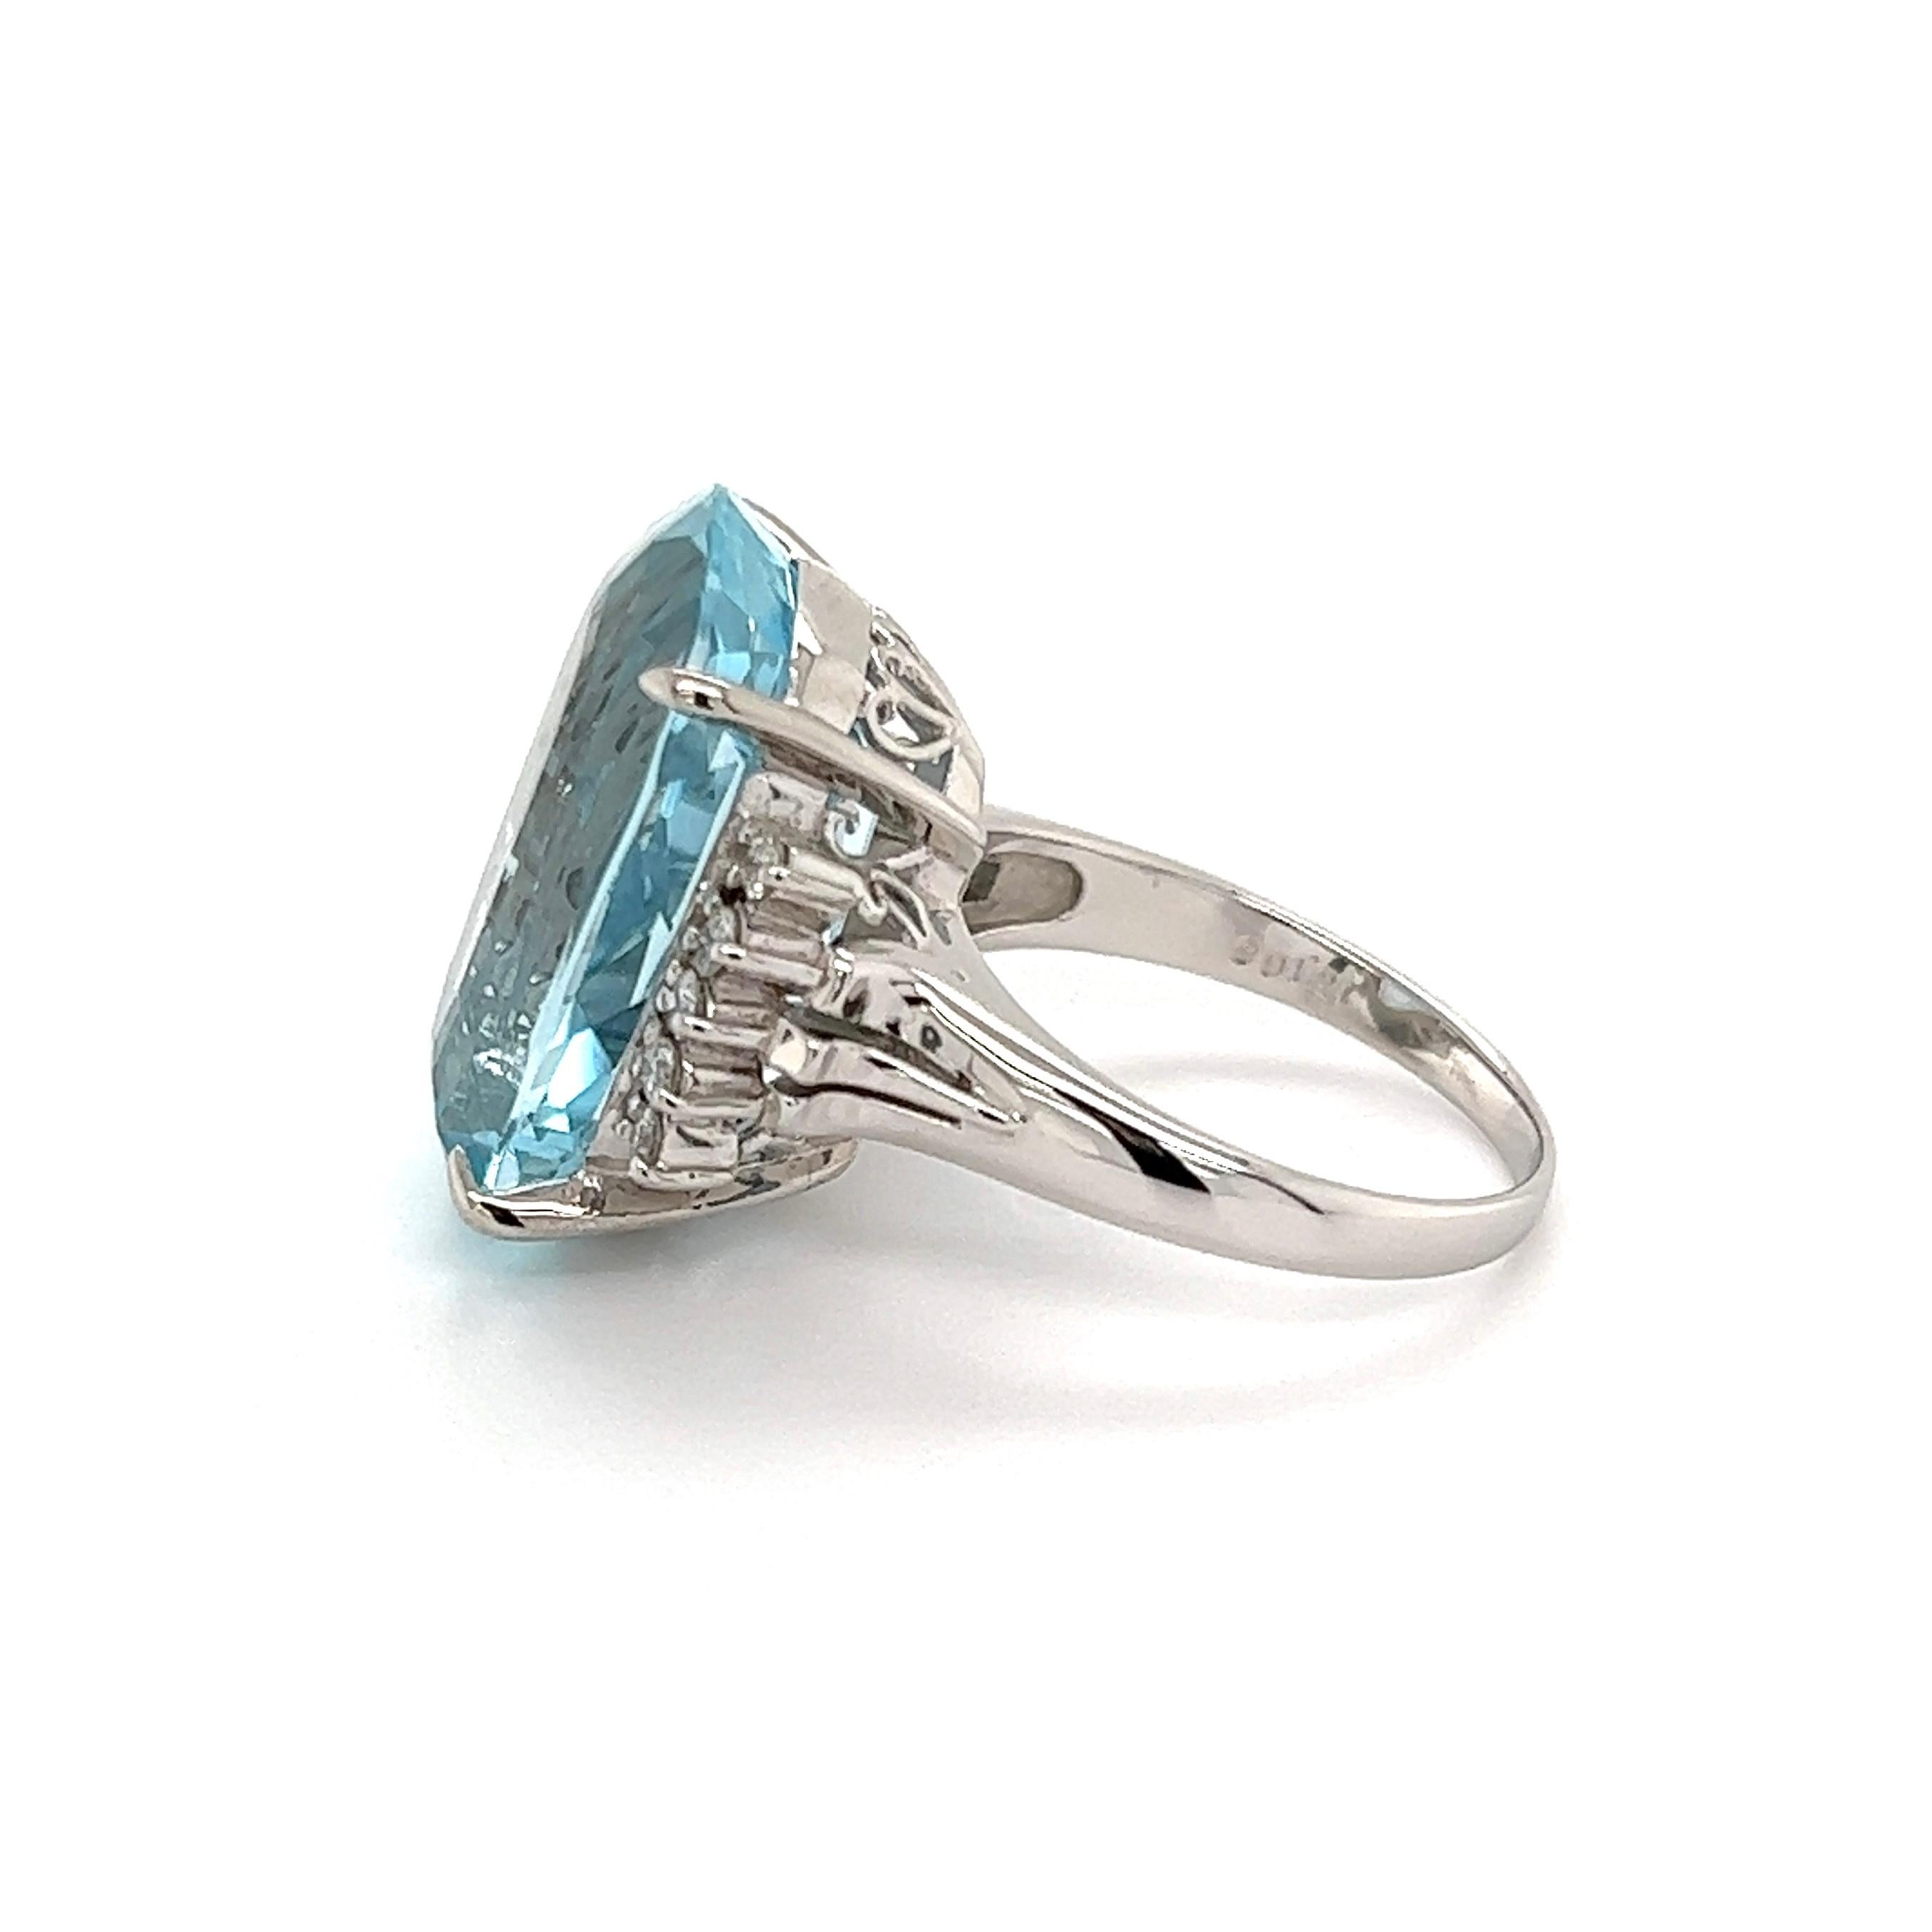 15.16 Carat Aquamarine and Diamond Platinum Cocktail Ring Estate Fine Jewelry In Excellent Condition For Sale In Montreal, QC